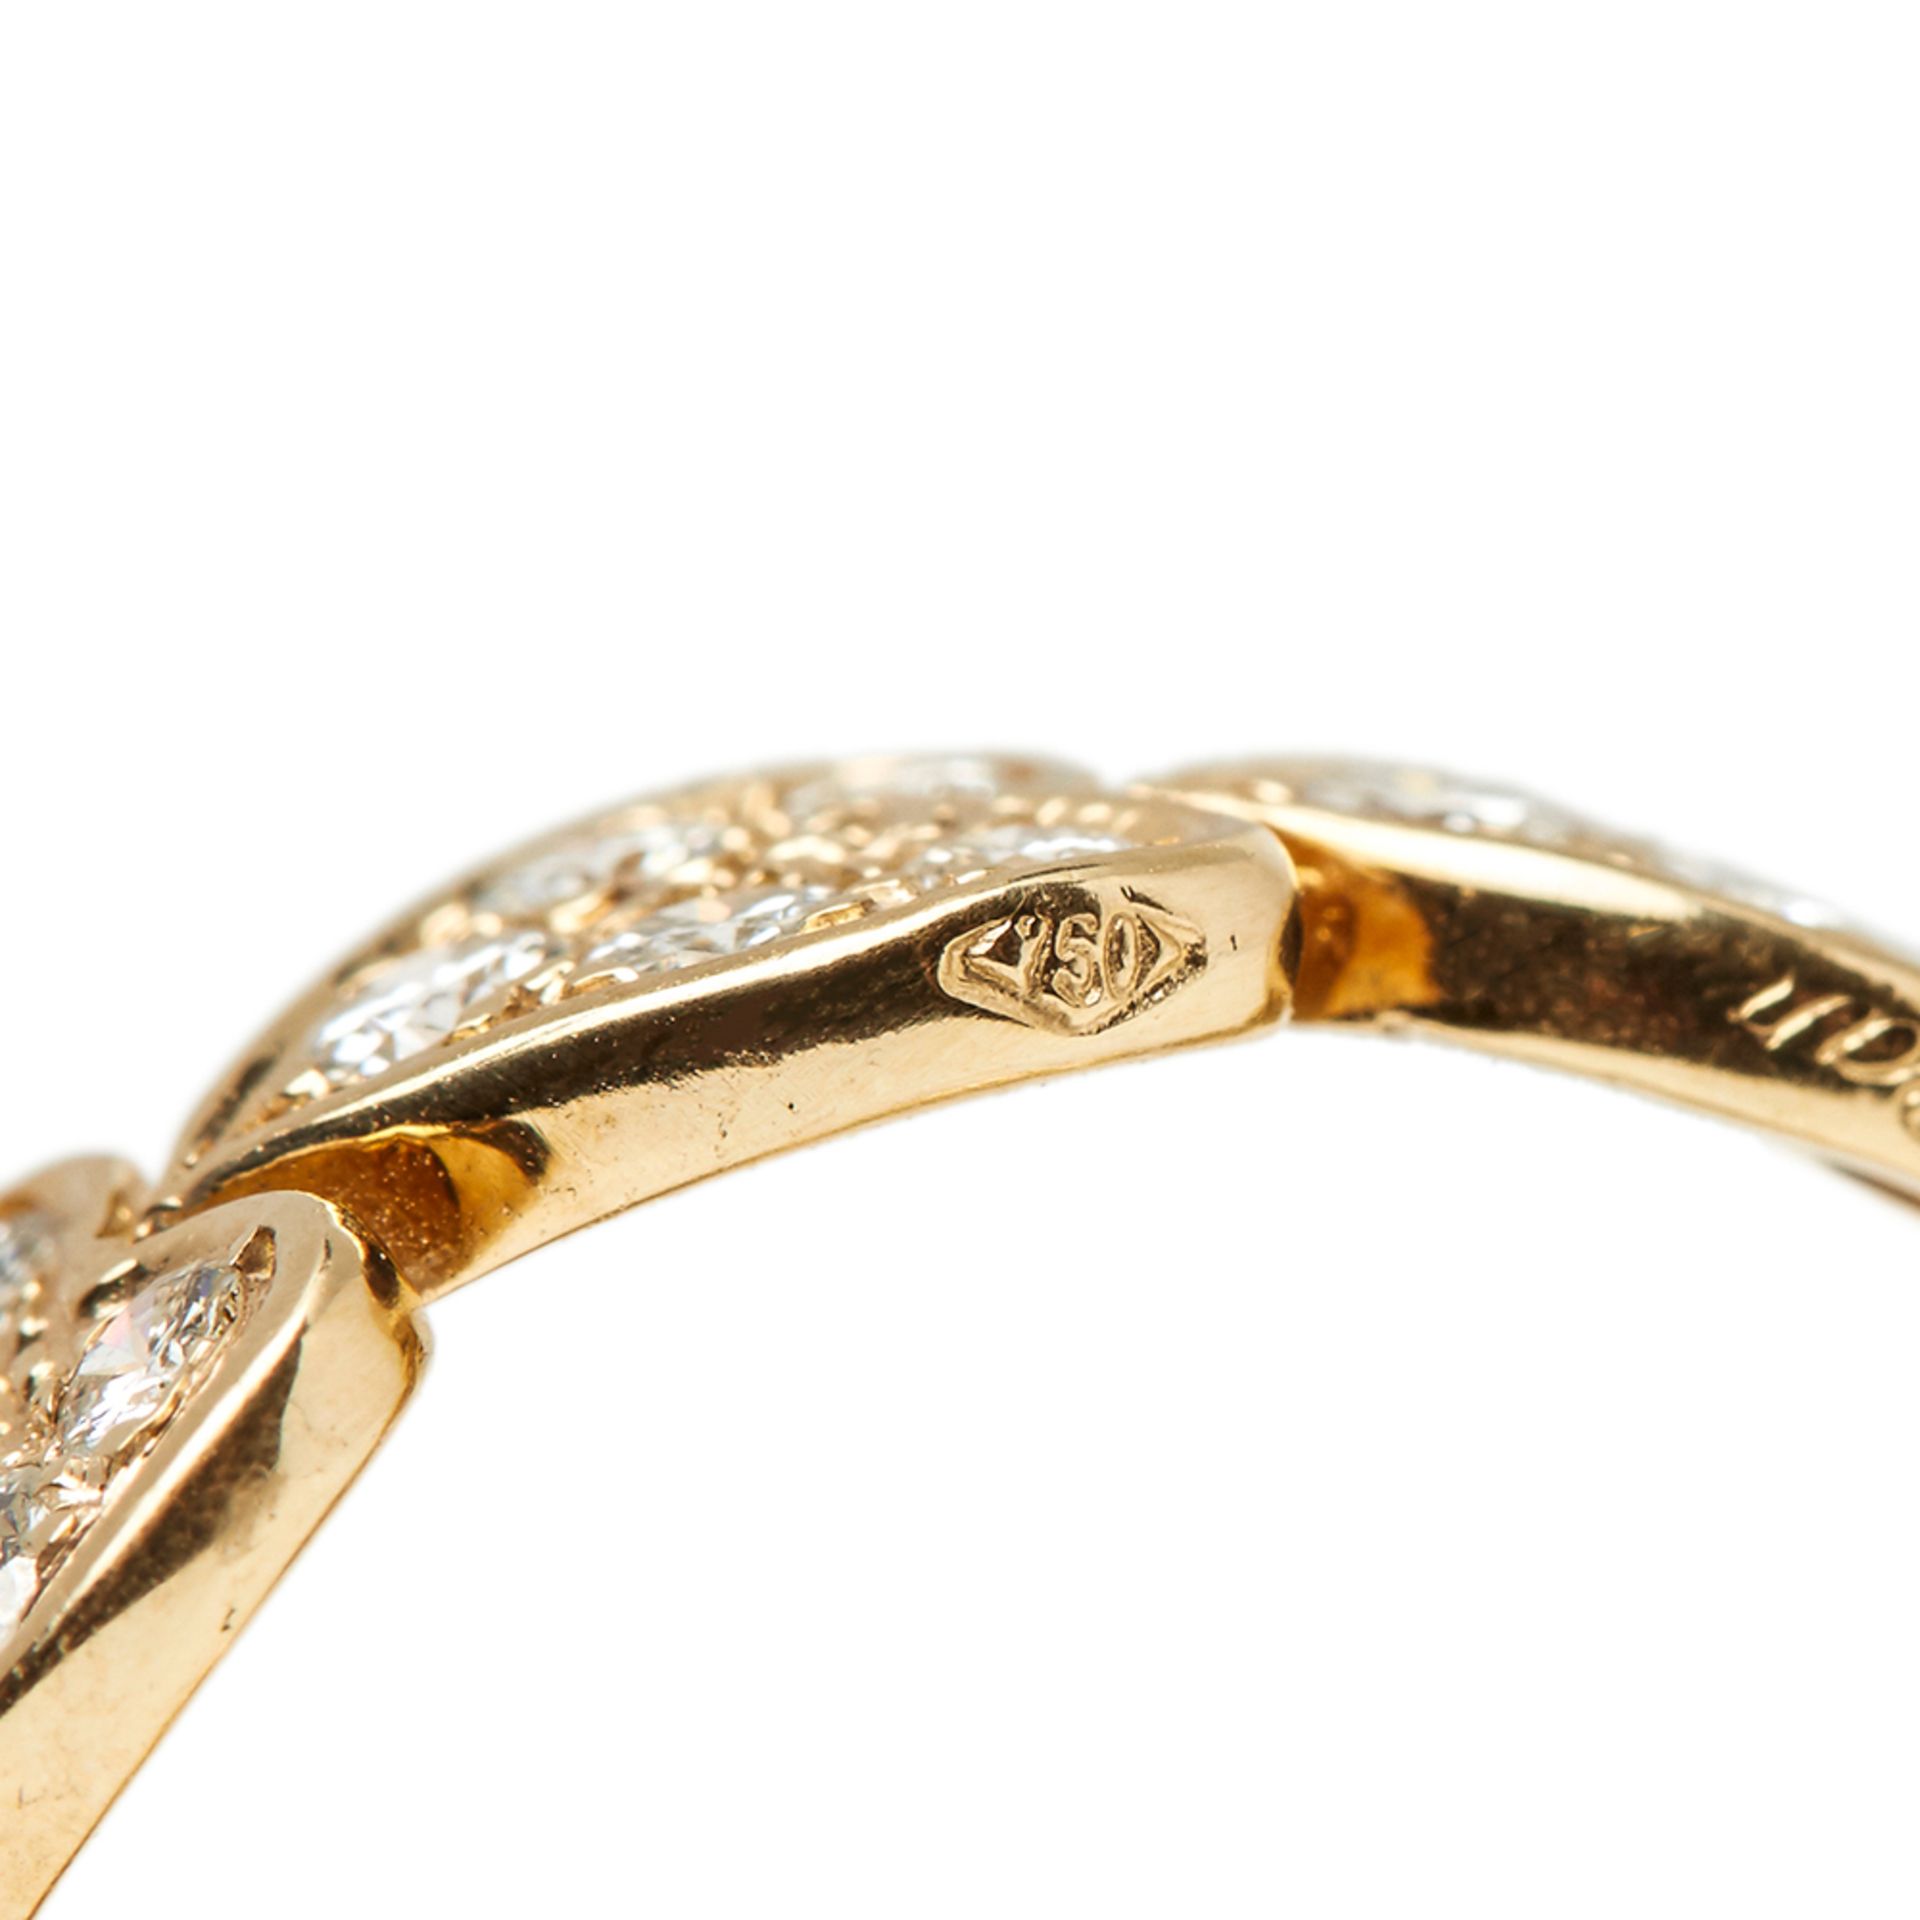 Cartier 18k Yellow Gold Diamond Heart Ring - Image 8 of 9